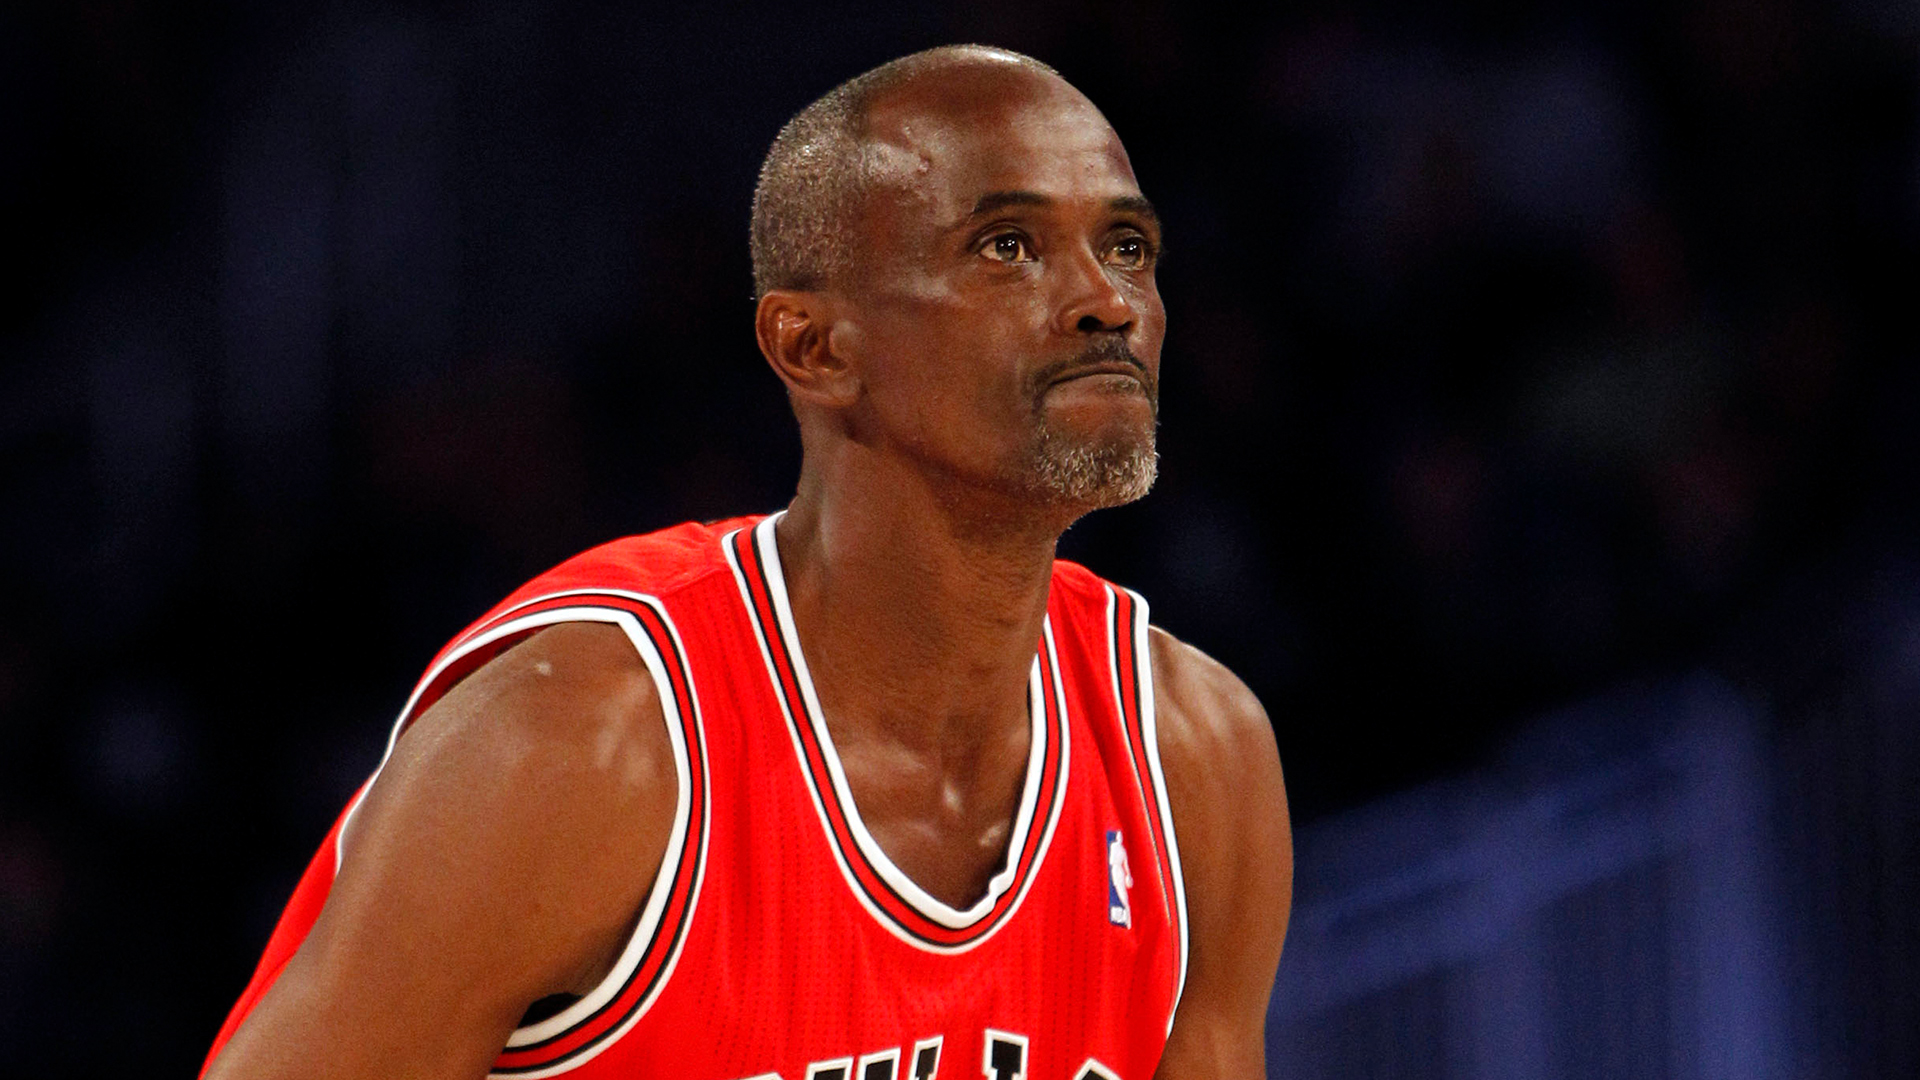 Craig Hodges is still part of the fight - Chicago Sun-Times